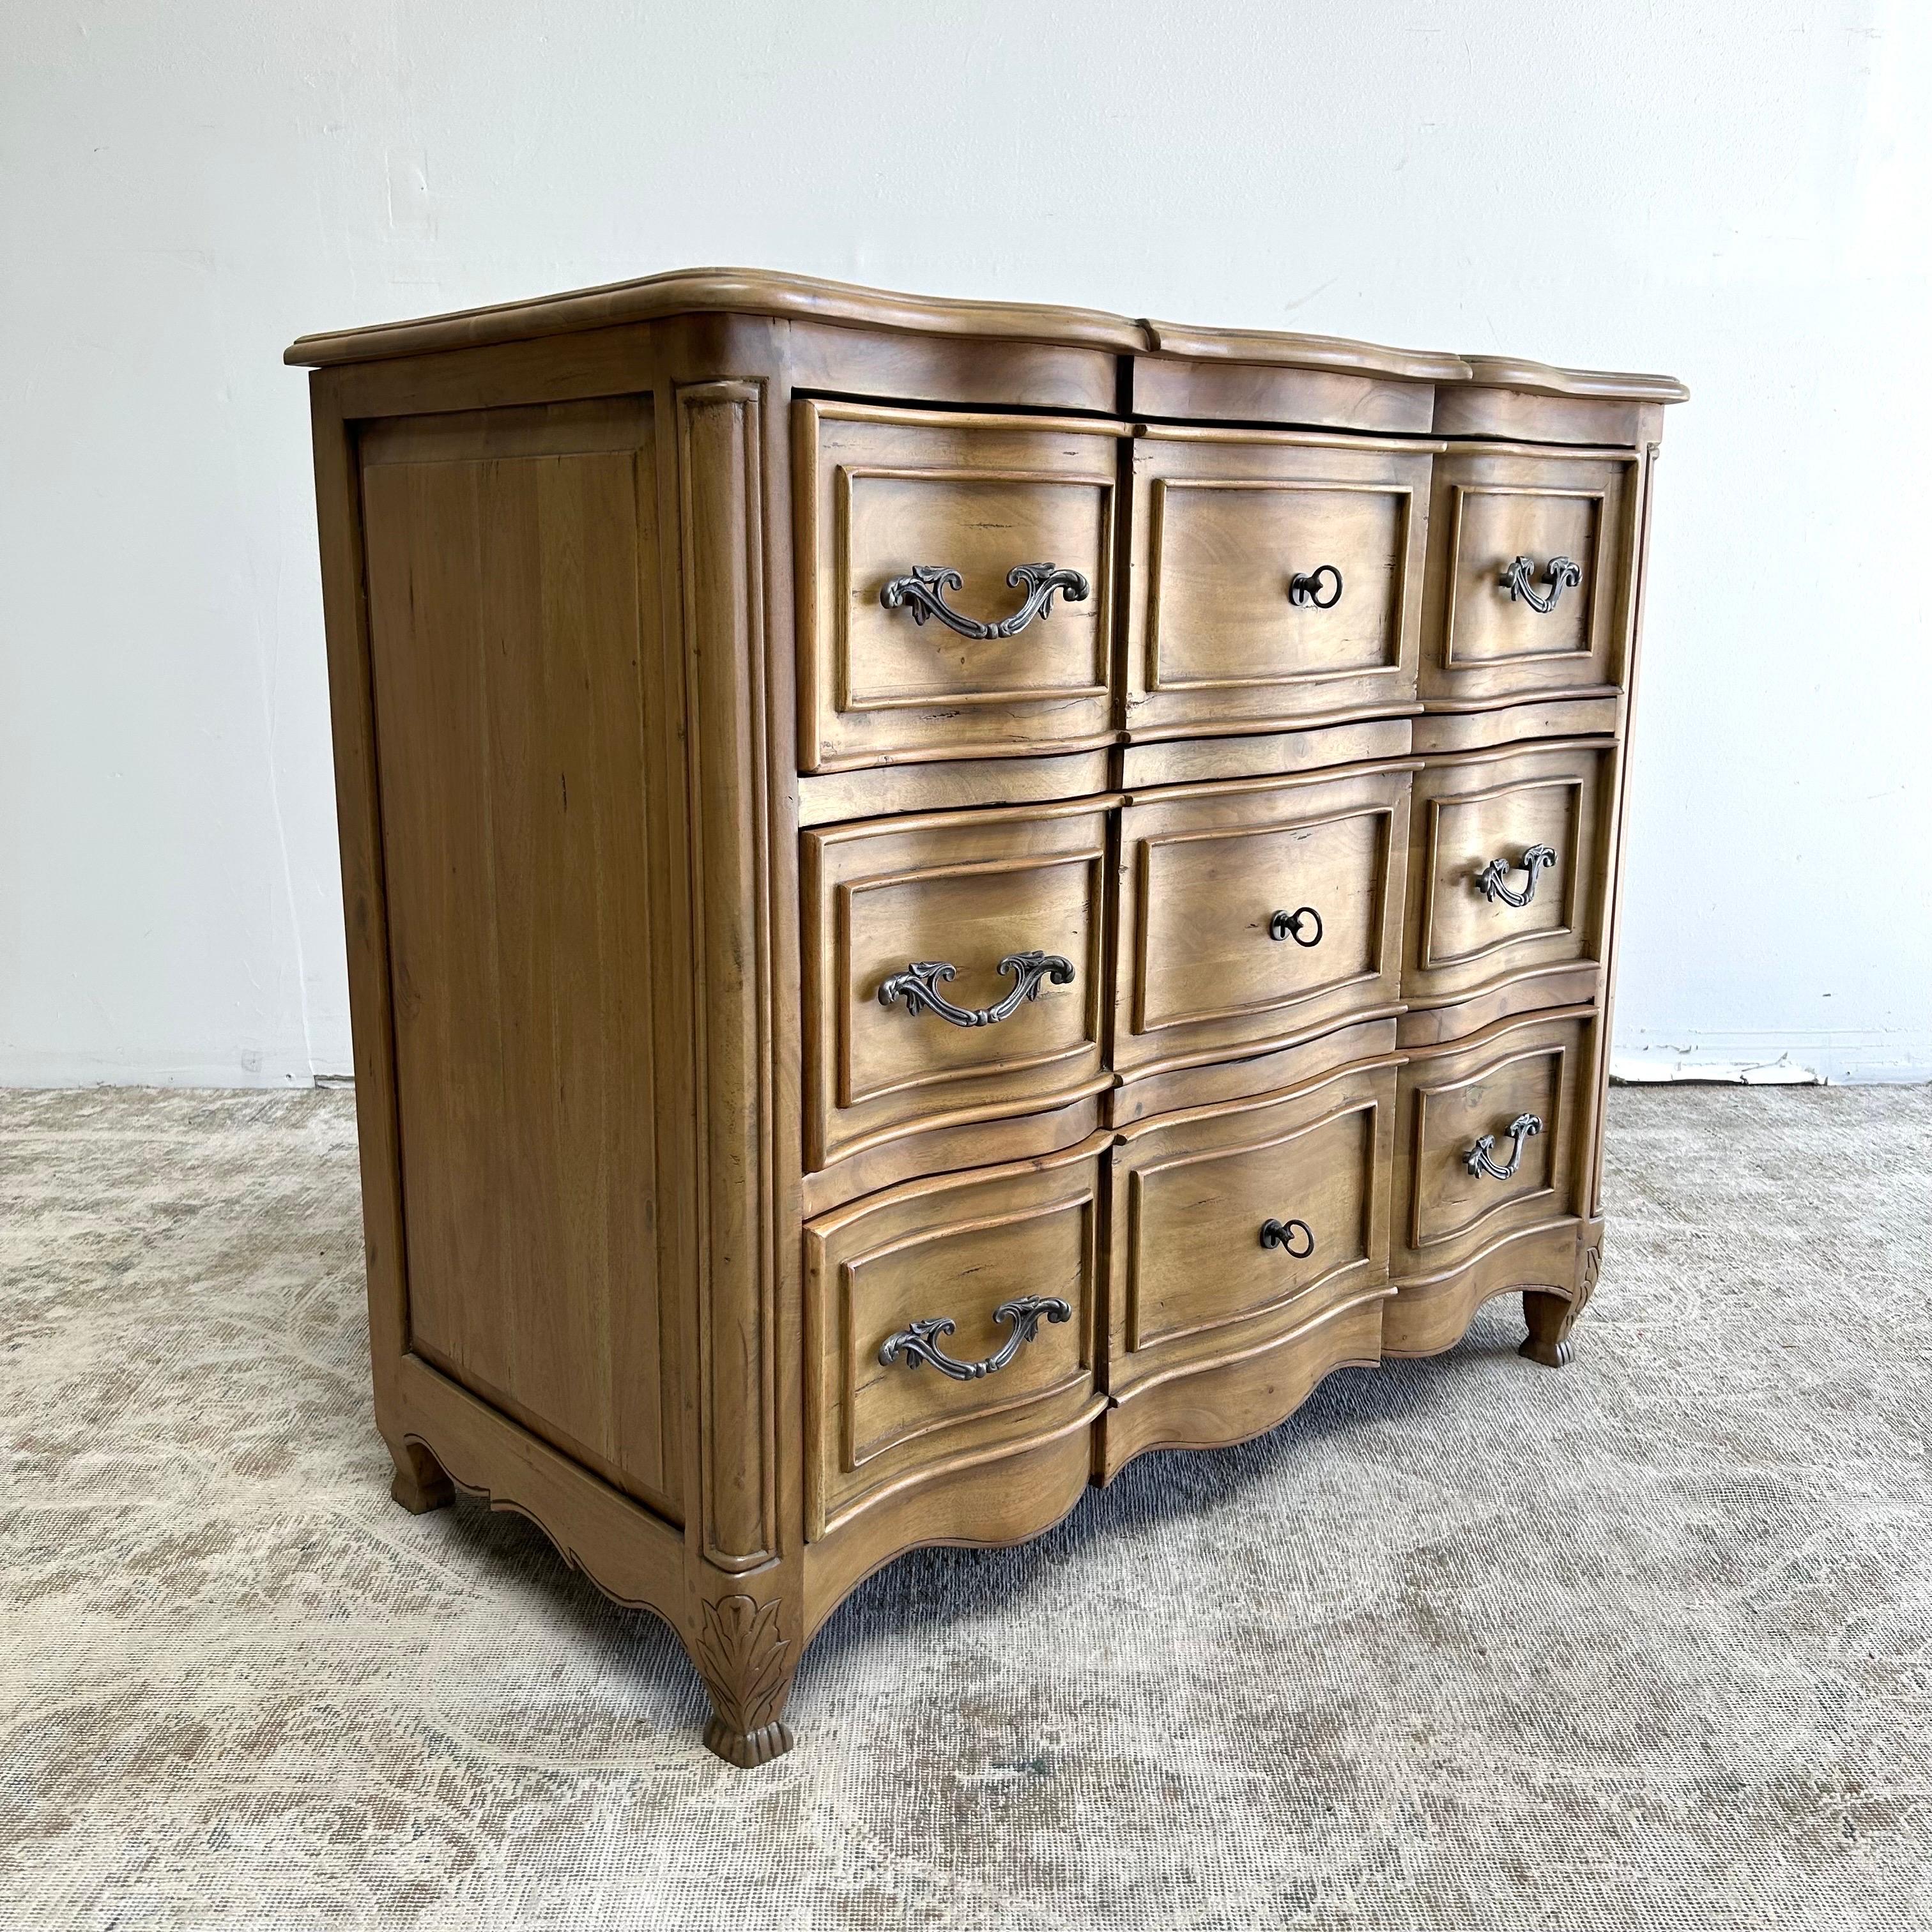 Heirloom quality chest of drawers
Description : Solid Acacia W/Driftwood Finish
Color / Style : Brown Traditional
Dimensions : 44